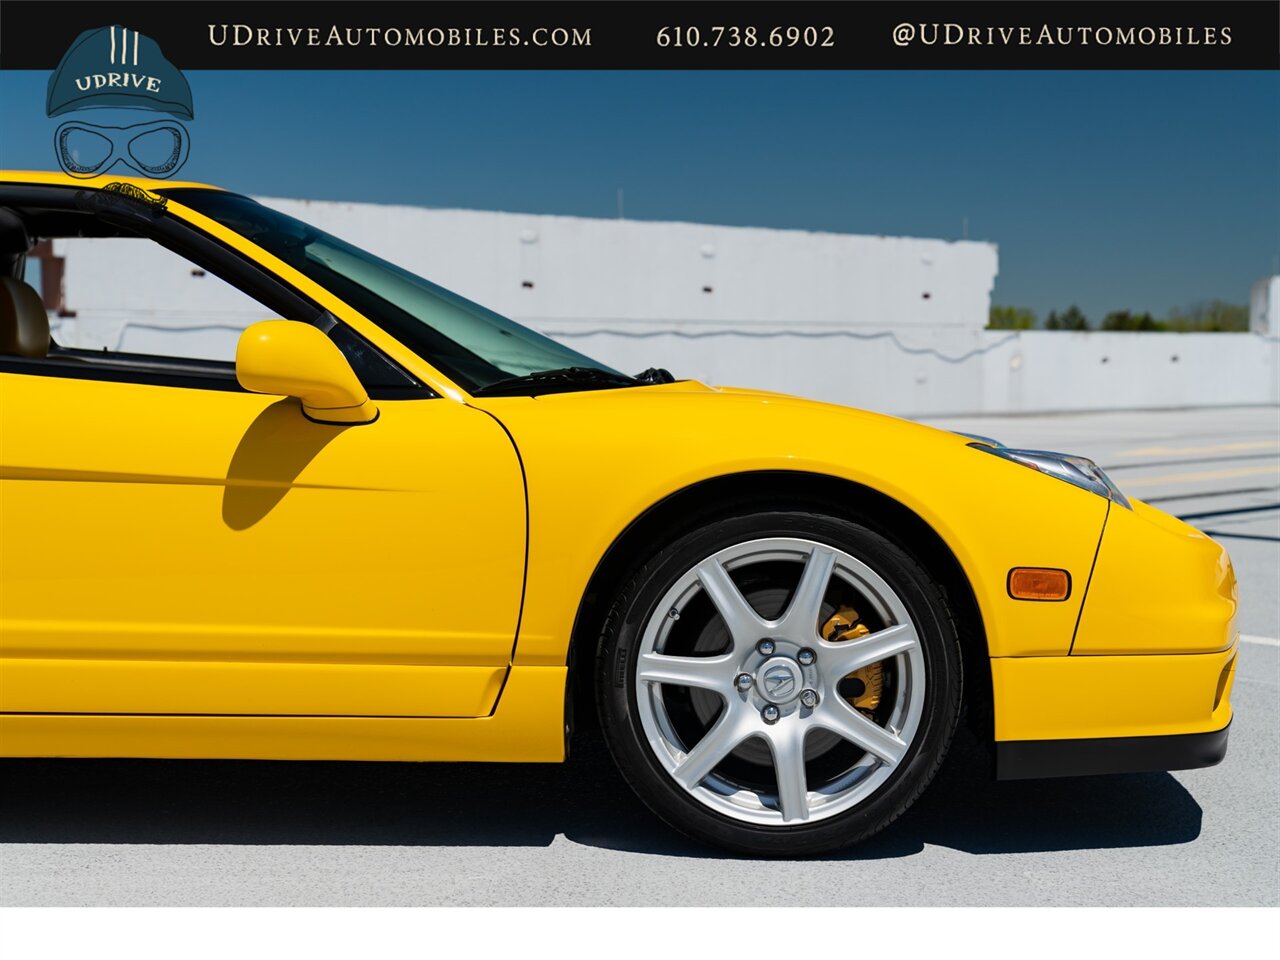 2003 Acura NSX NSX-T  Spa Yellow over Yellow Lthr 1 of 13 Produced - Photo 16 - West Chester, PA 19382